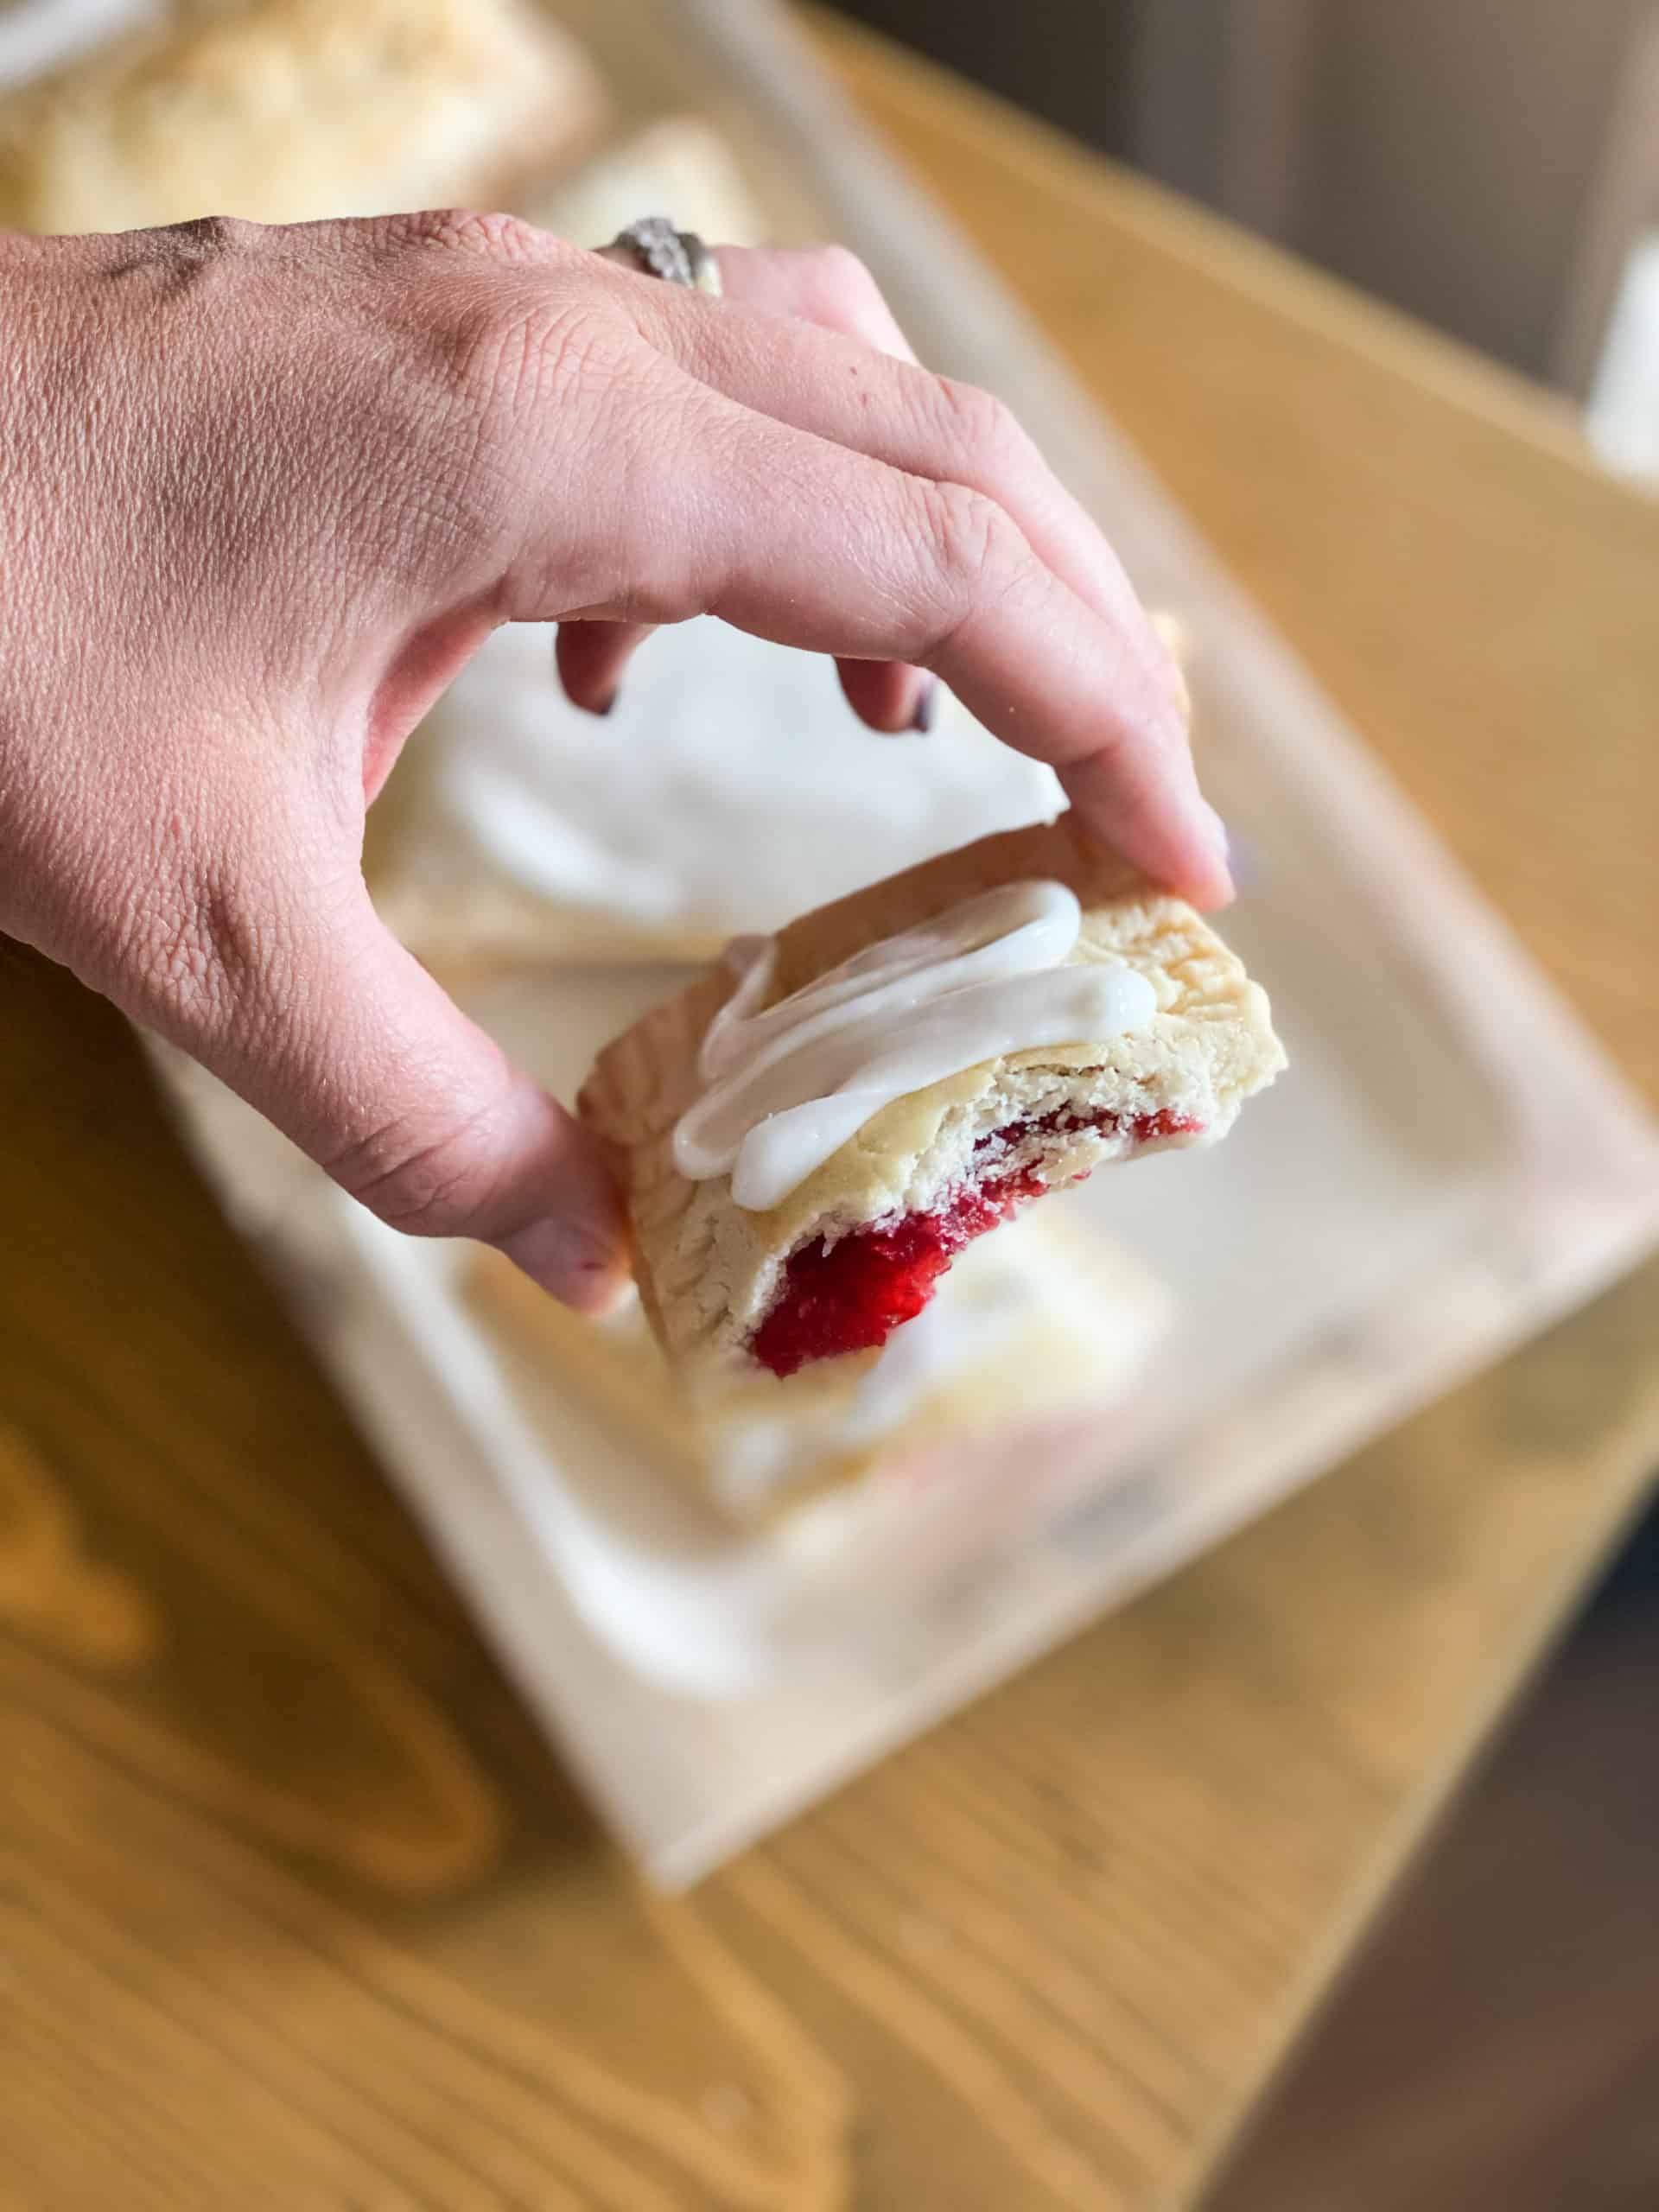 Gluten-Free Pop Tarts in a hand with raspberry filling